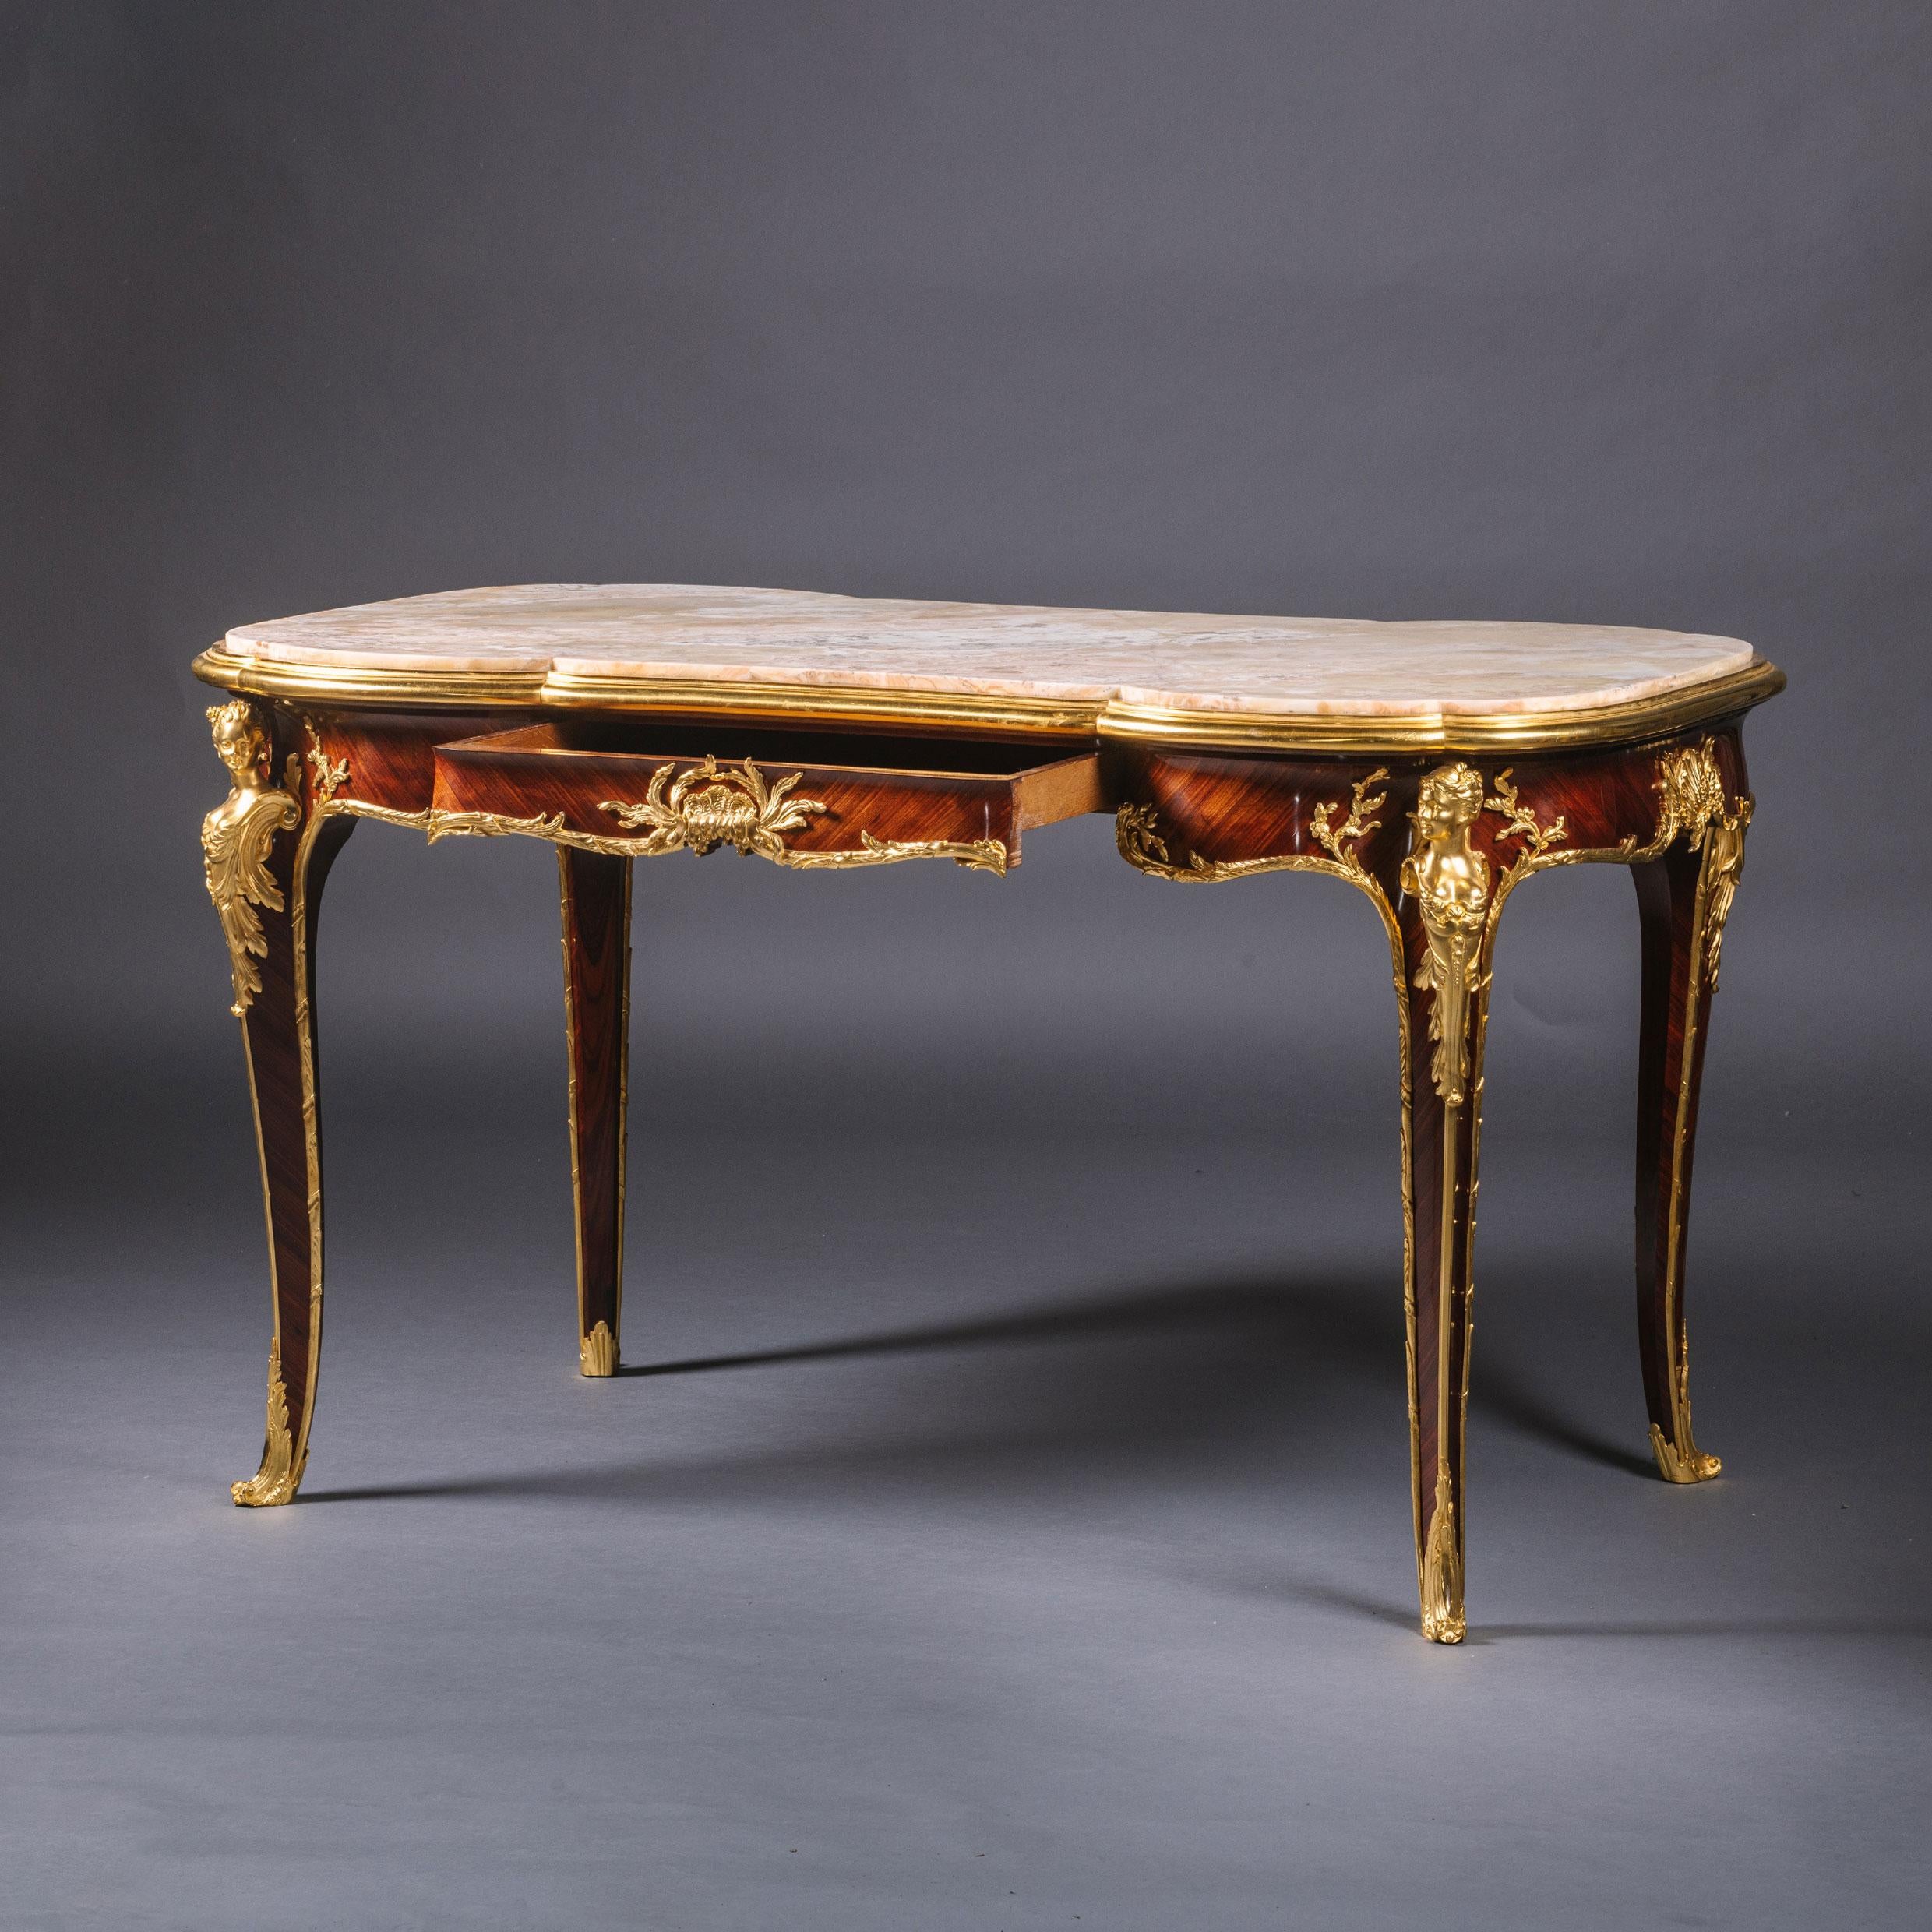 A Rare Belle Epoque Gilt-Bronze Mounted Parquetry Inlaid Centre Table, By François Linke. The Mounts Designed by Léon Messagé. 

Signed 'F. Linke'.

This opulent centre table has a beautifully patterned onyx top inset within a gilt-bronze moulded